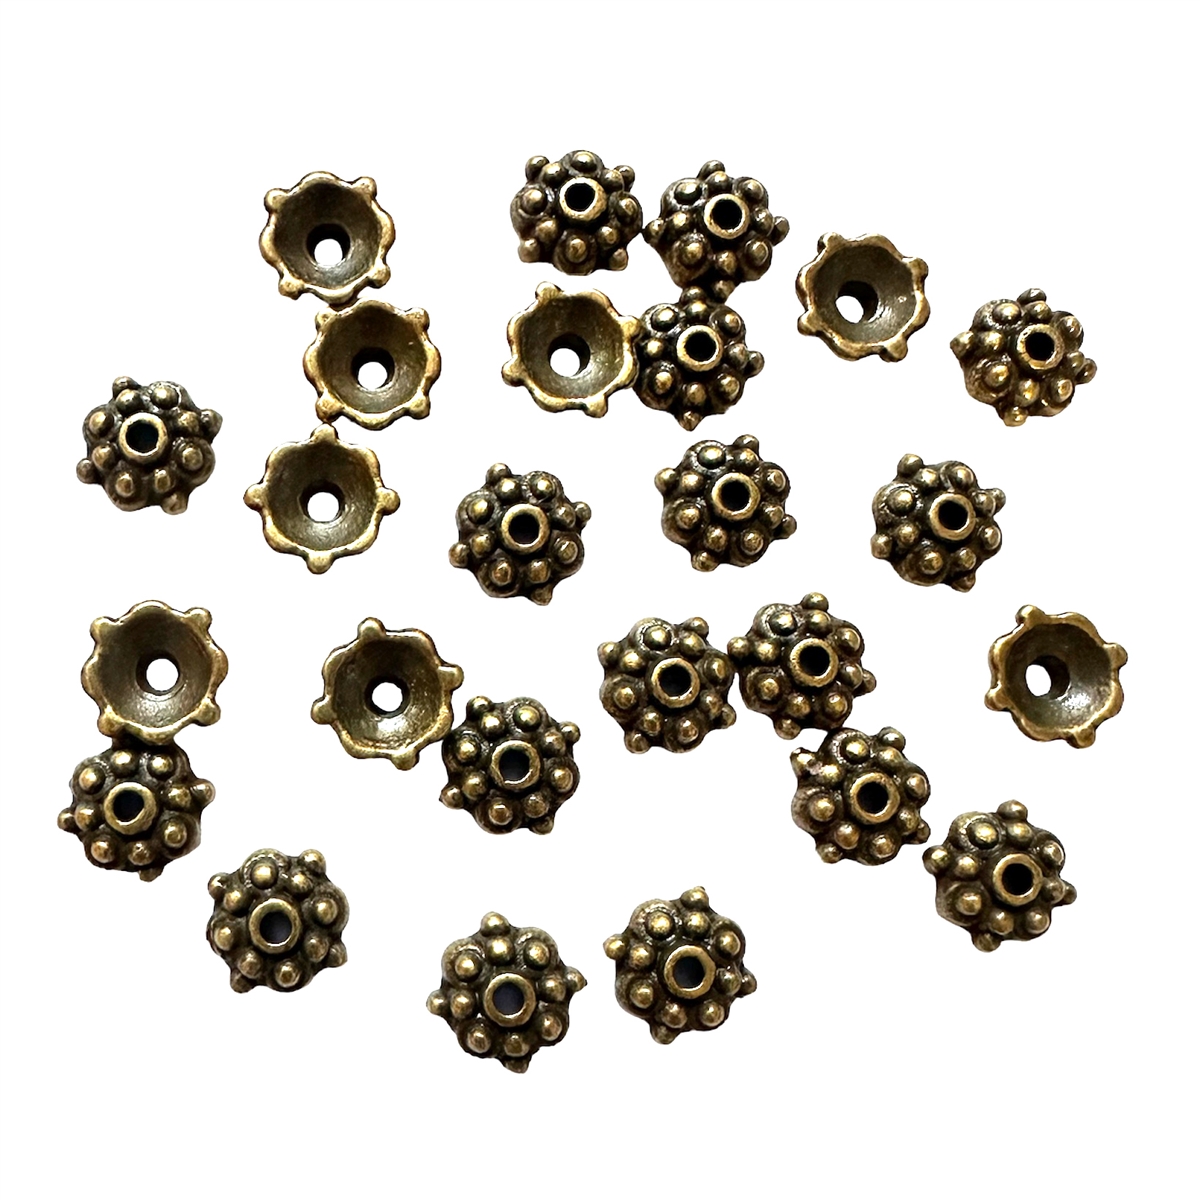 80 PCS Antique Bronze Plated Jewelry Making Charms Findings Bulk Wholesale  P2OC3Z Cello Violin